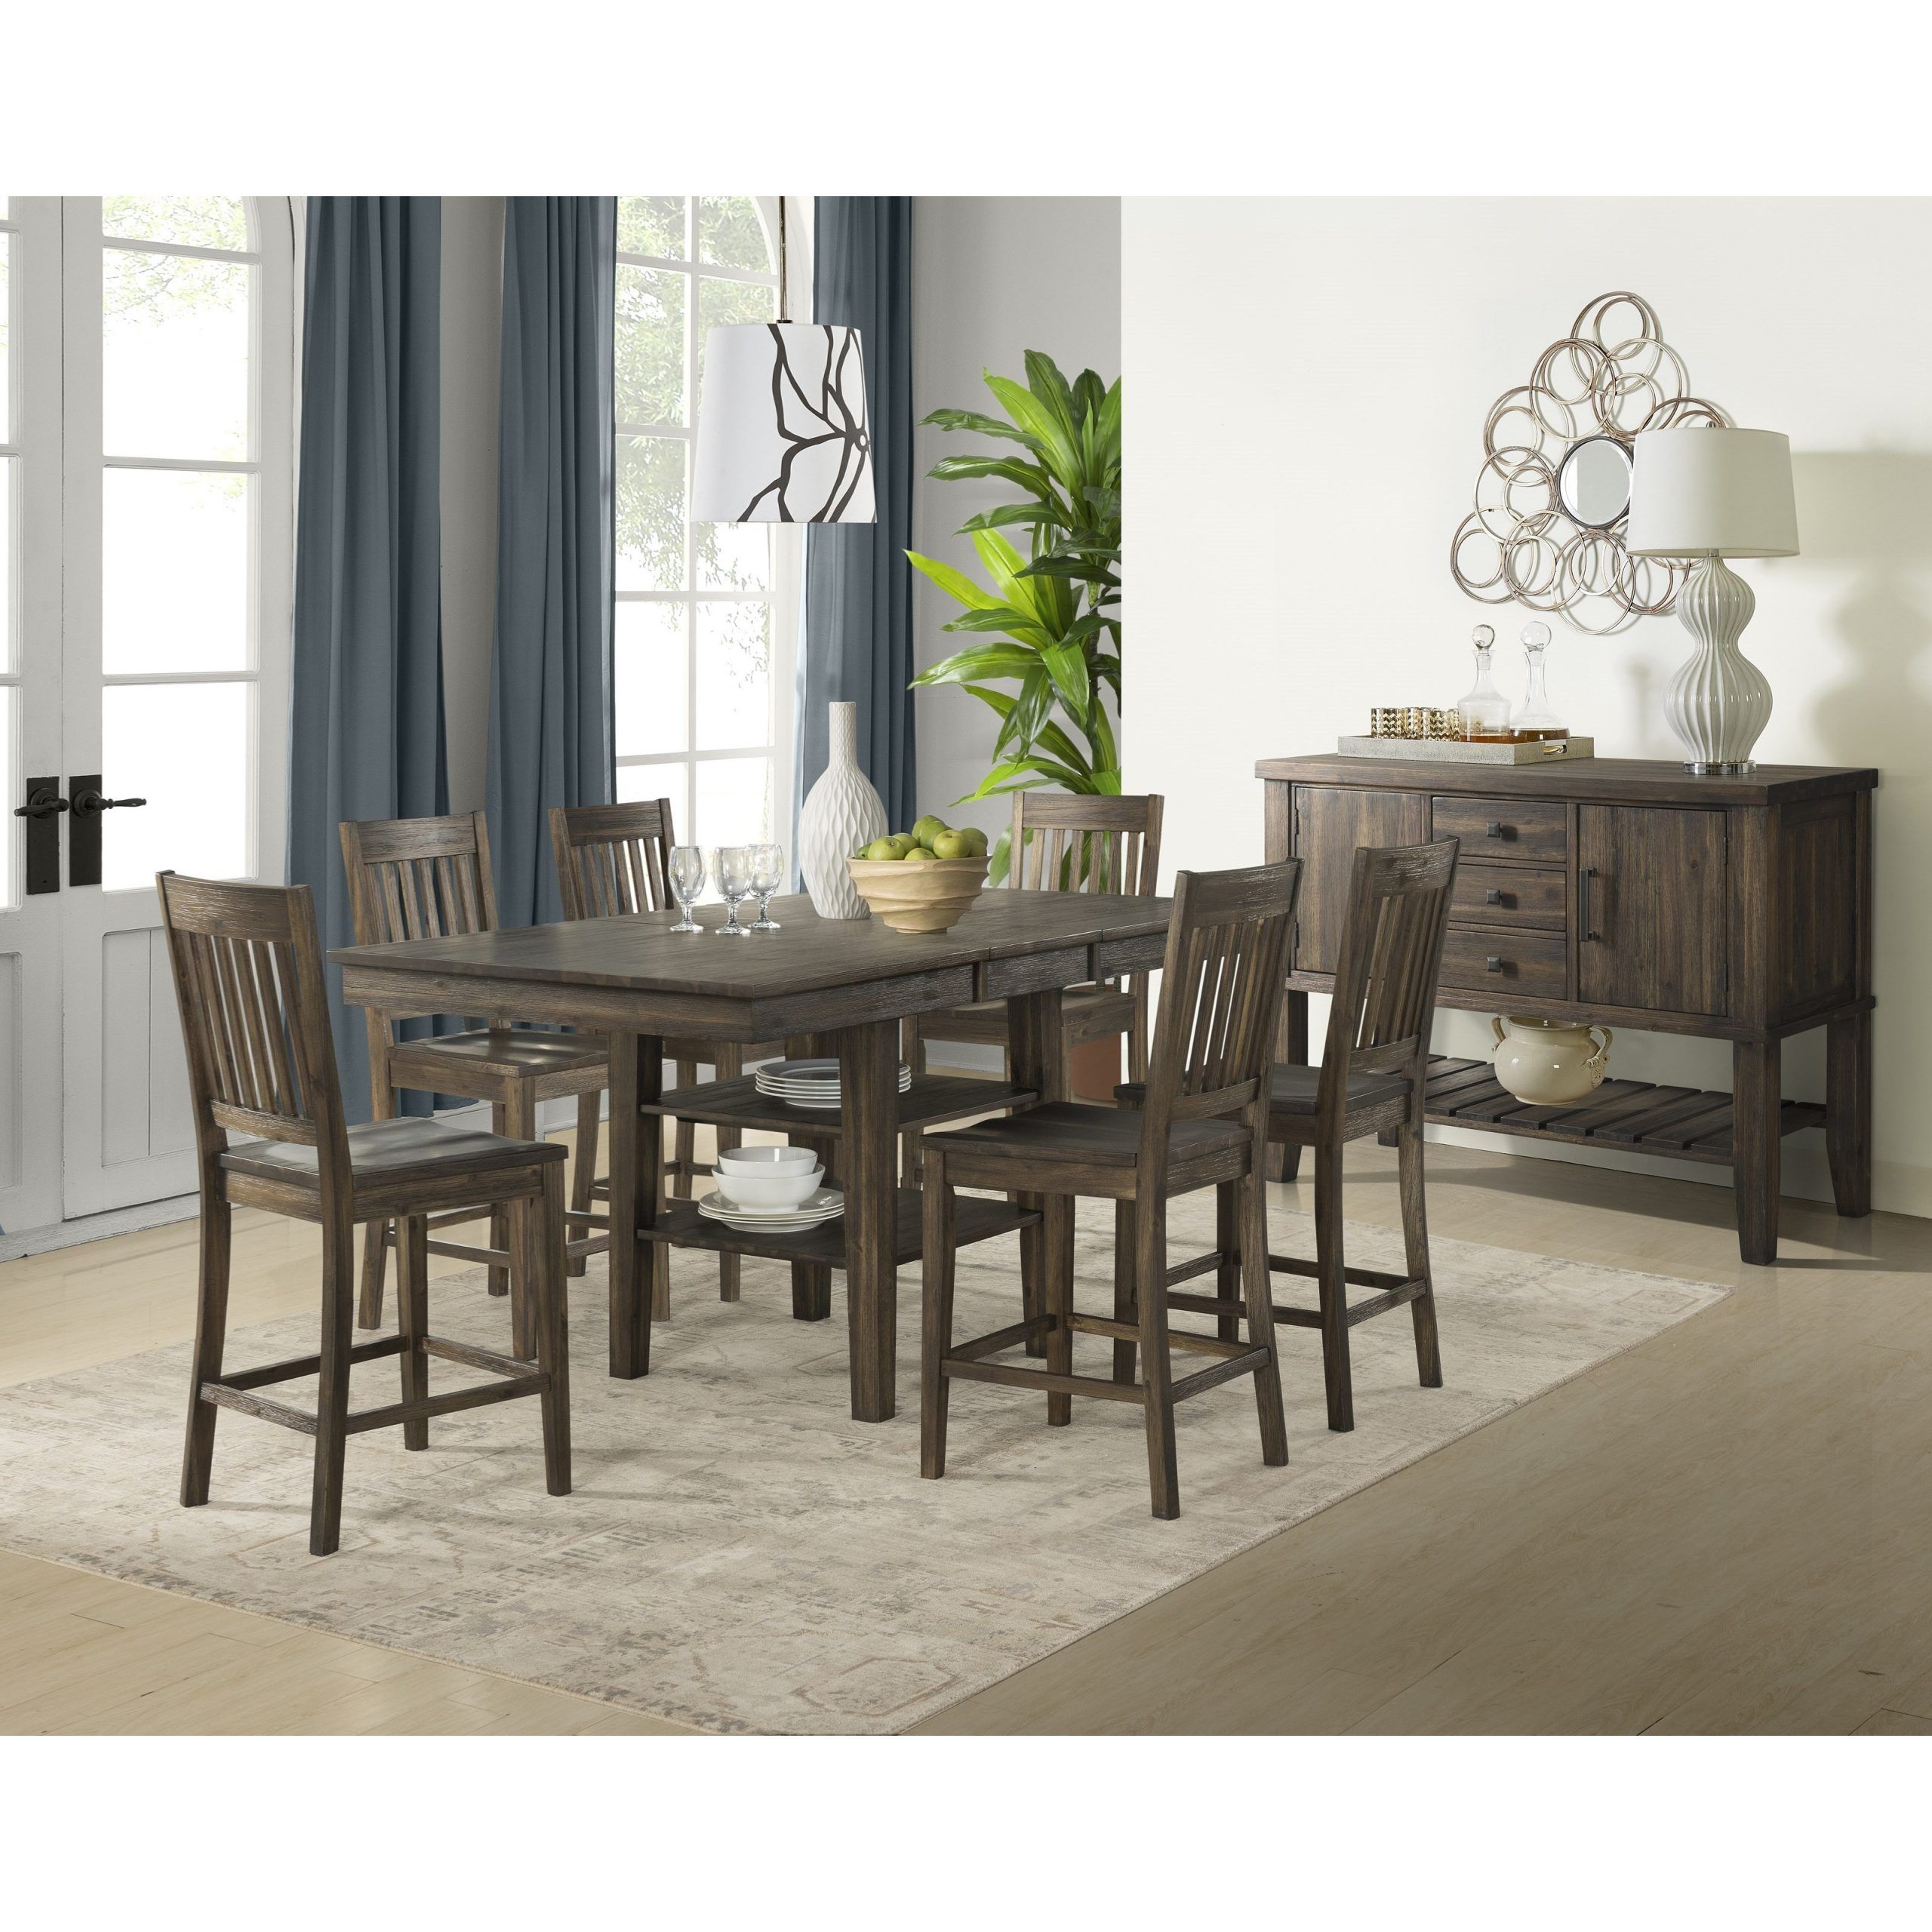 Most Recently Released Aamerica Huron Transitional Solid Wood Counter Height Within Dawid Counter Height Pedestal Dining Tables (View 5 of 20)